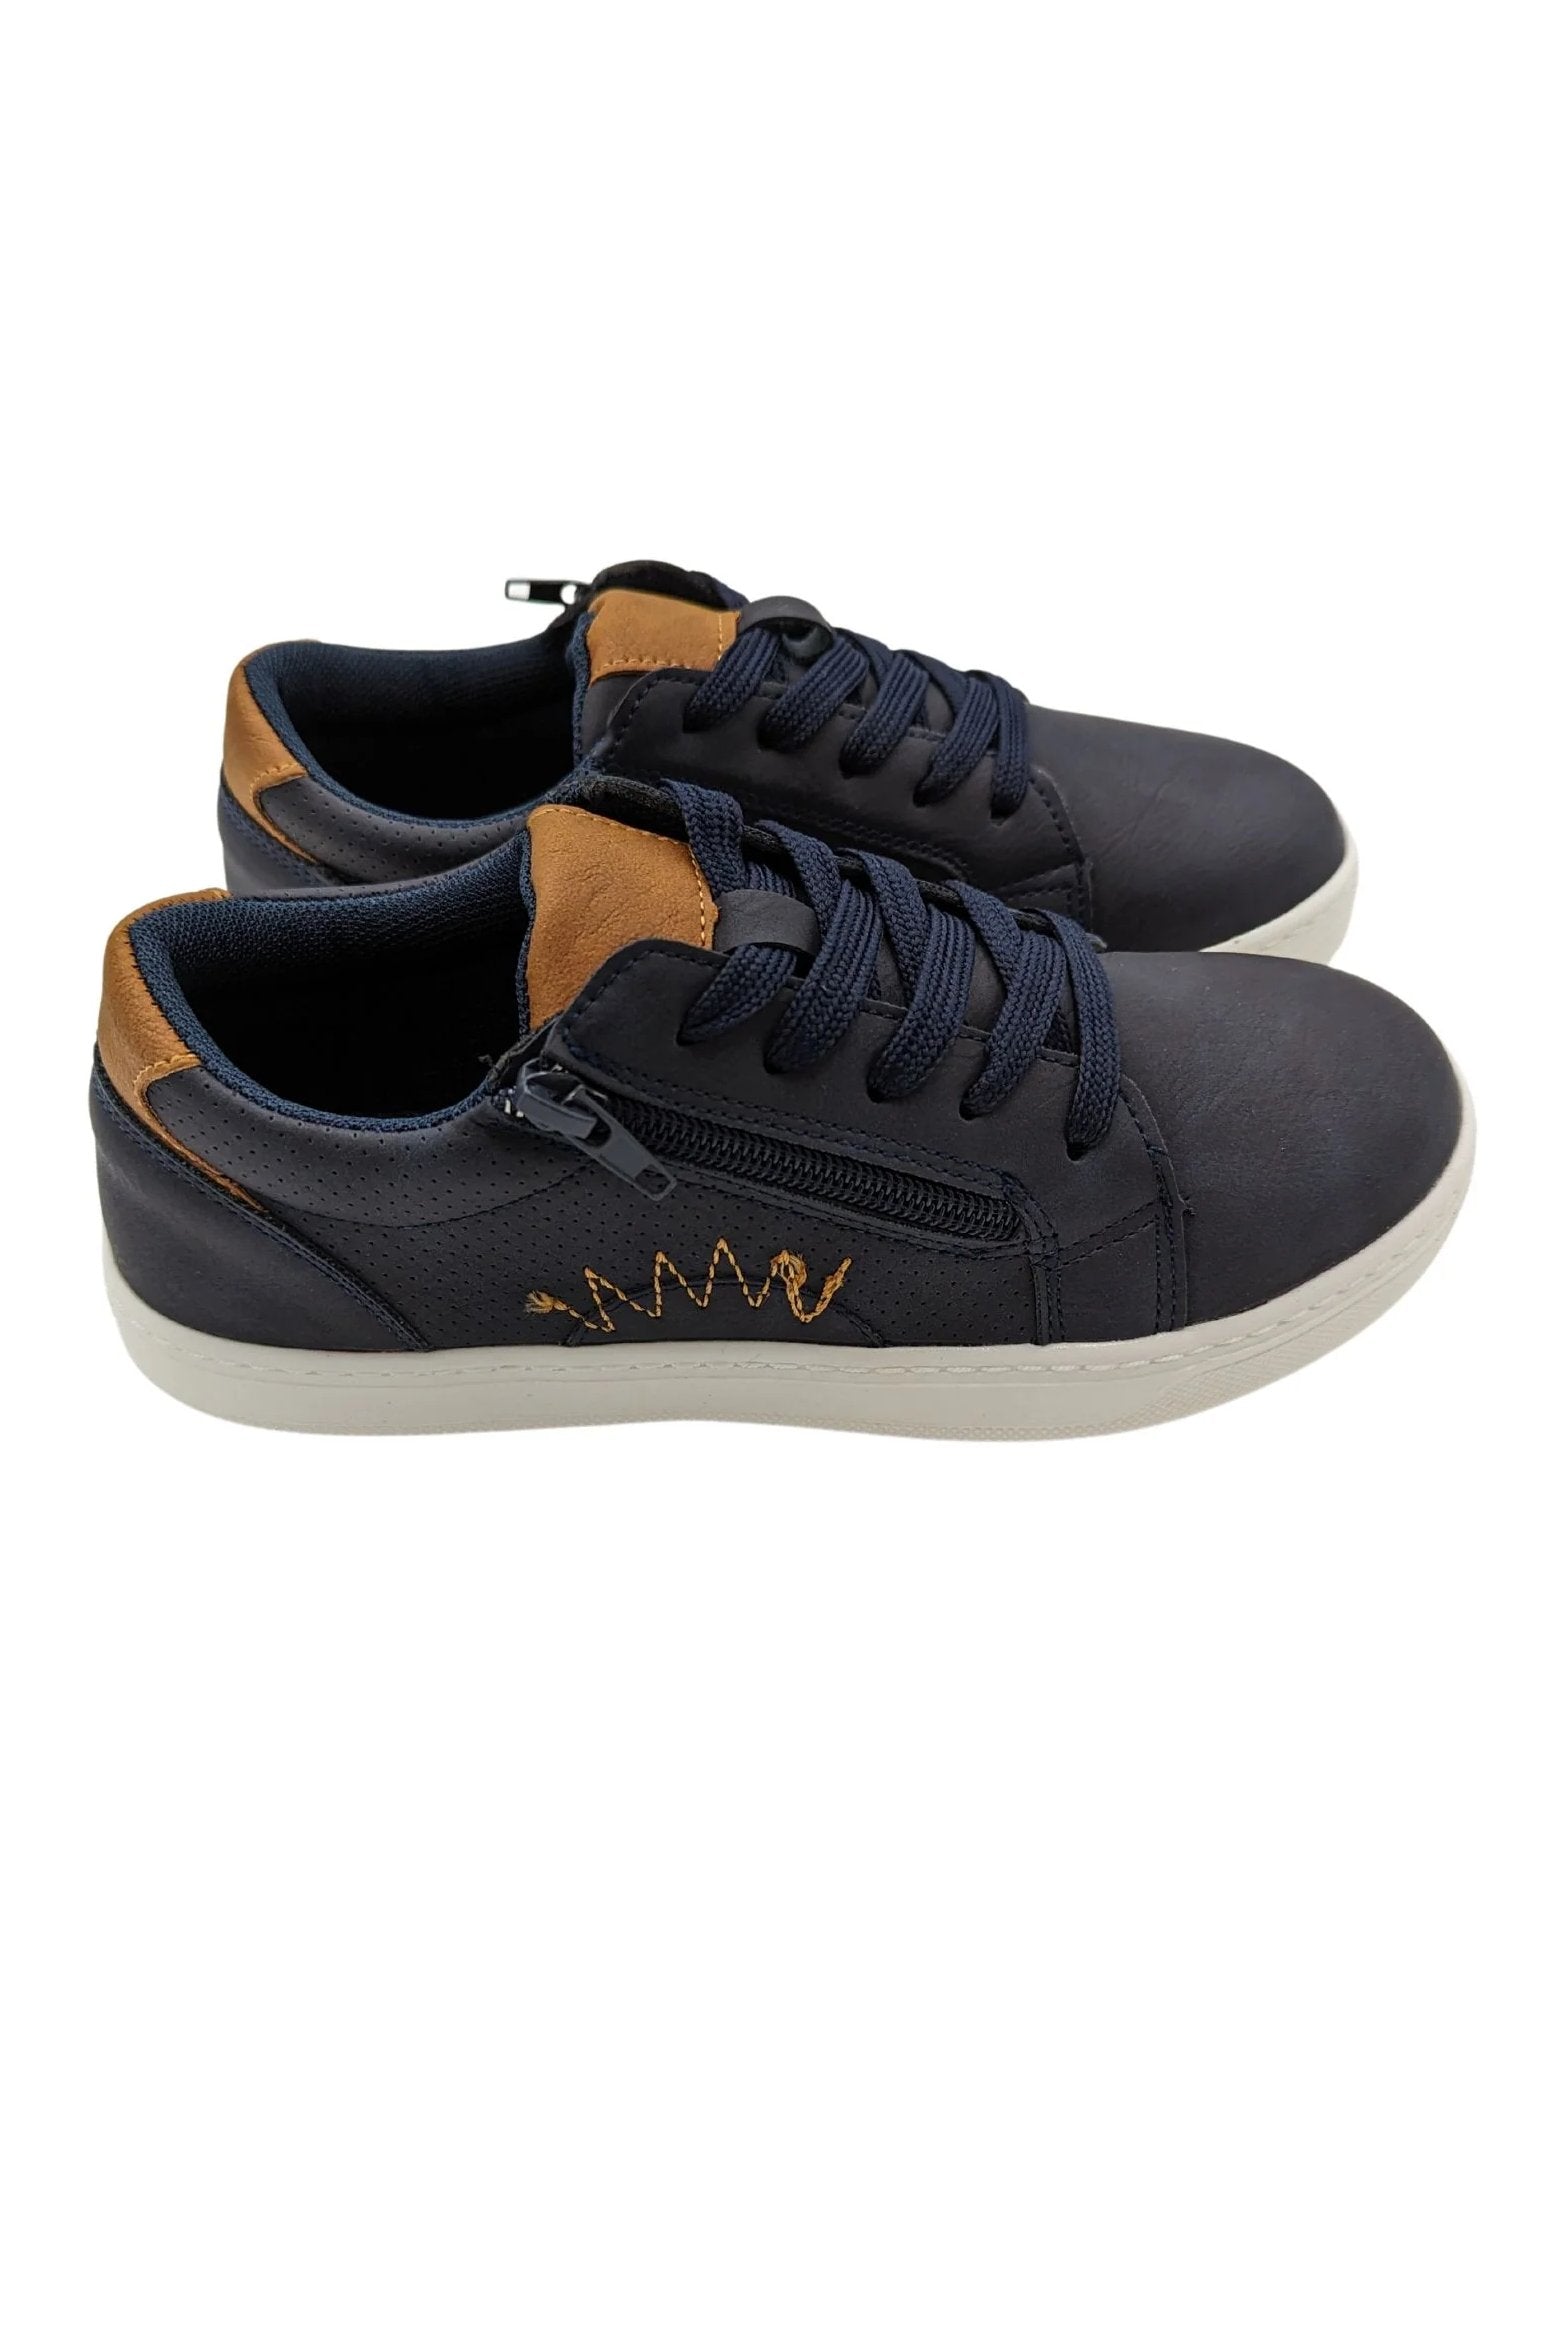 Lex Boys Navy Shoes-Side view